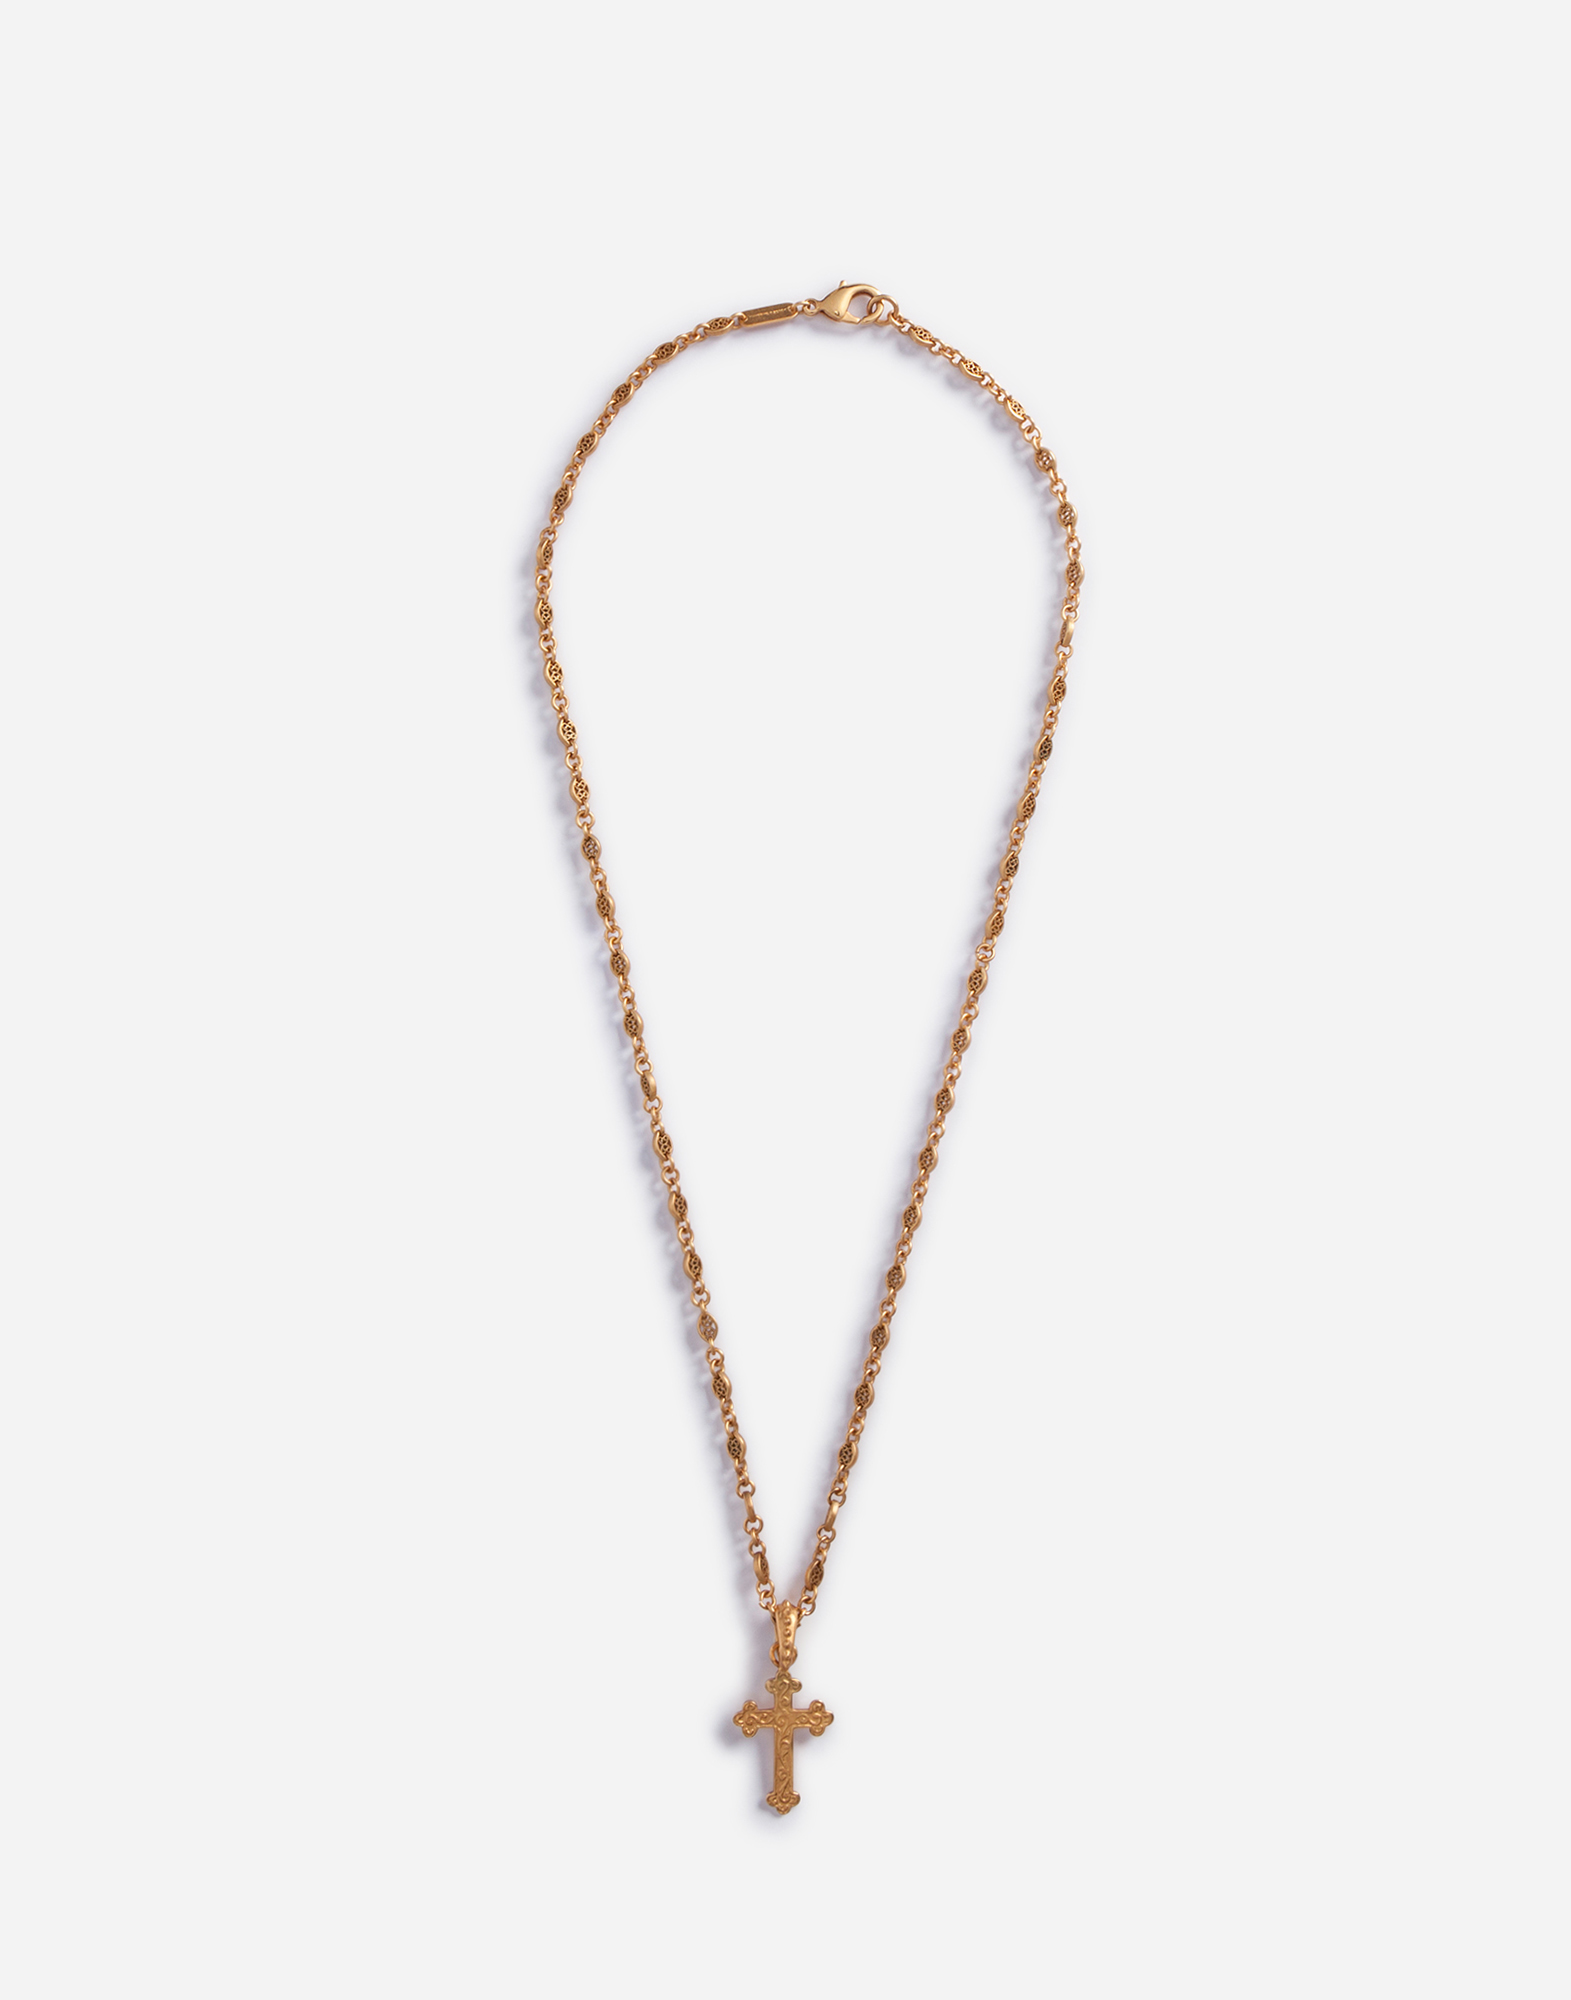 Necklace with cross